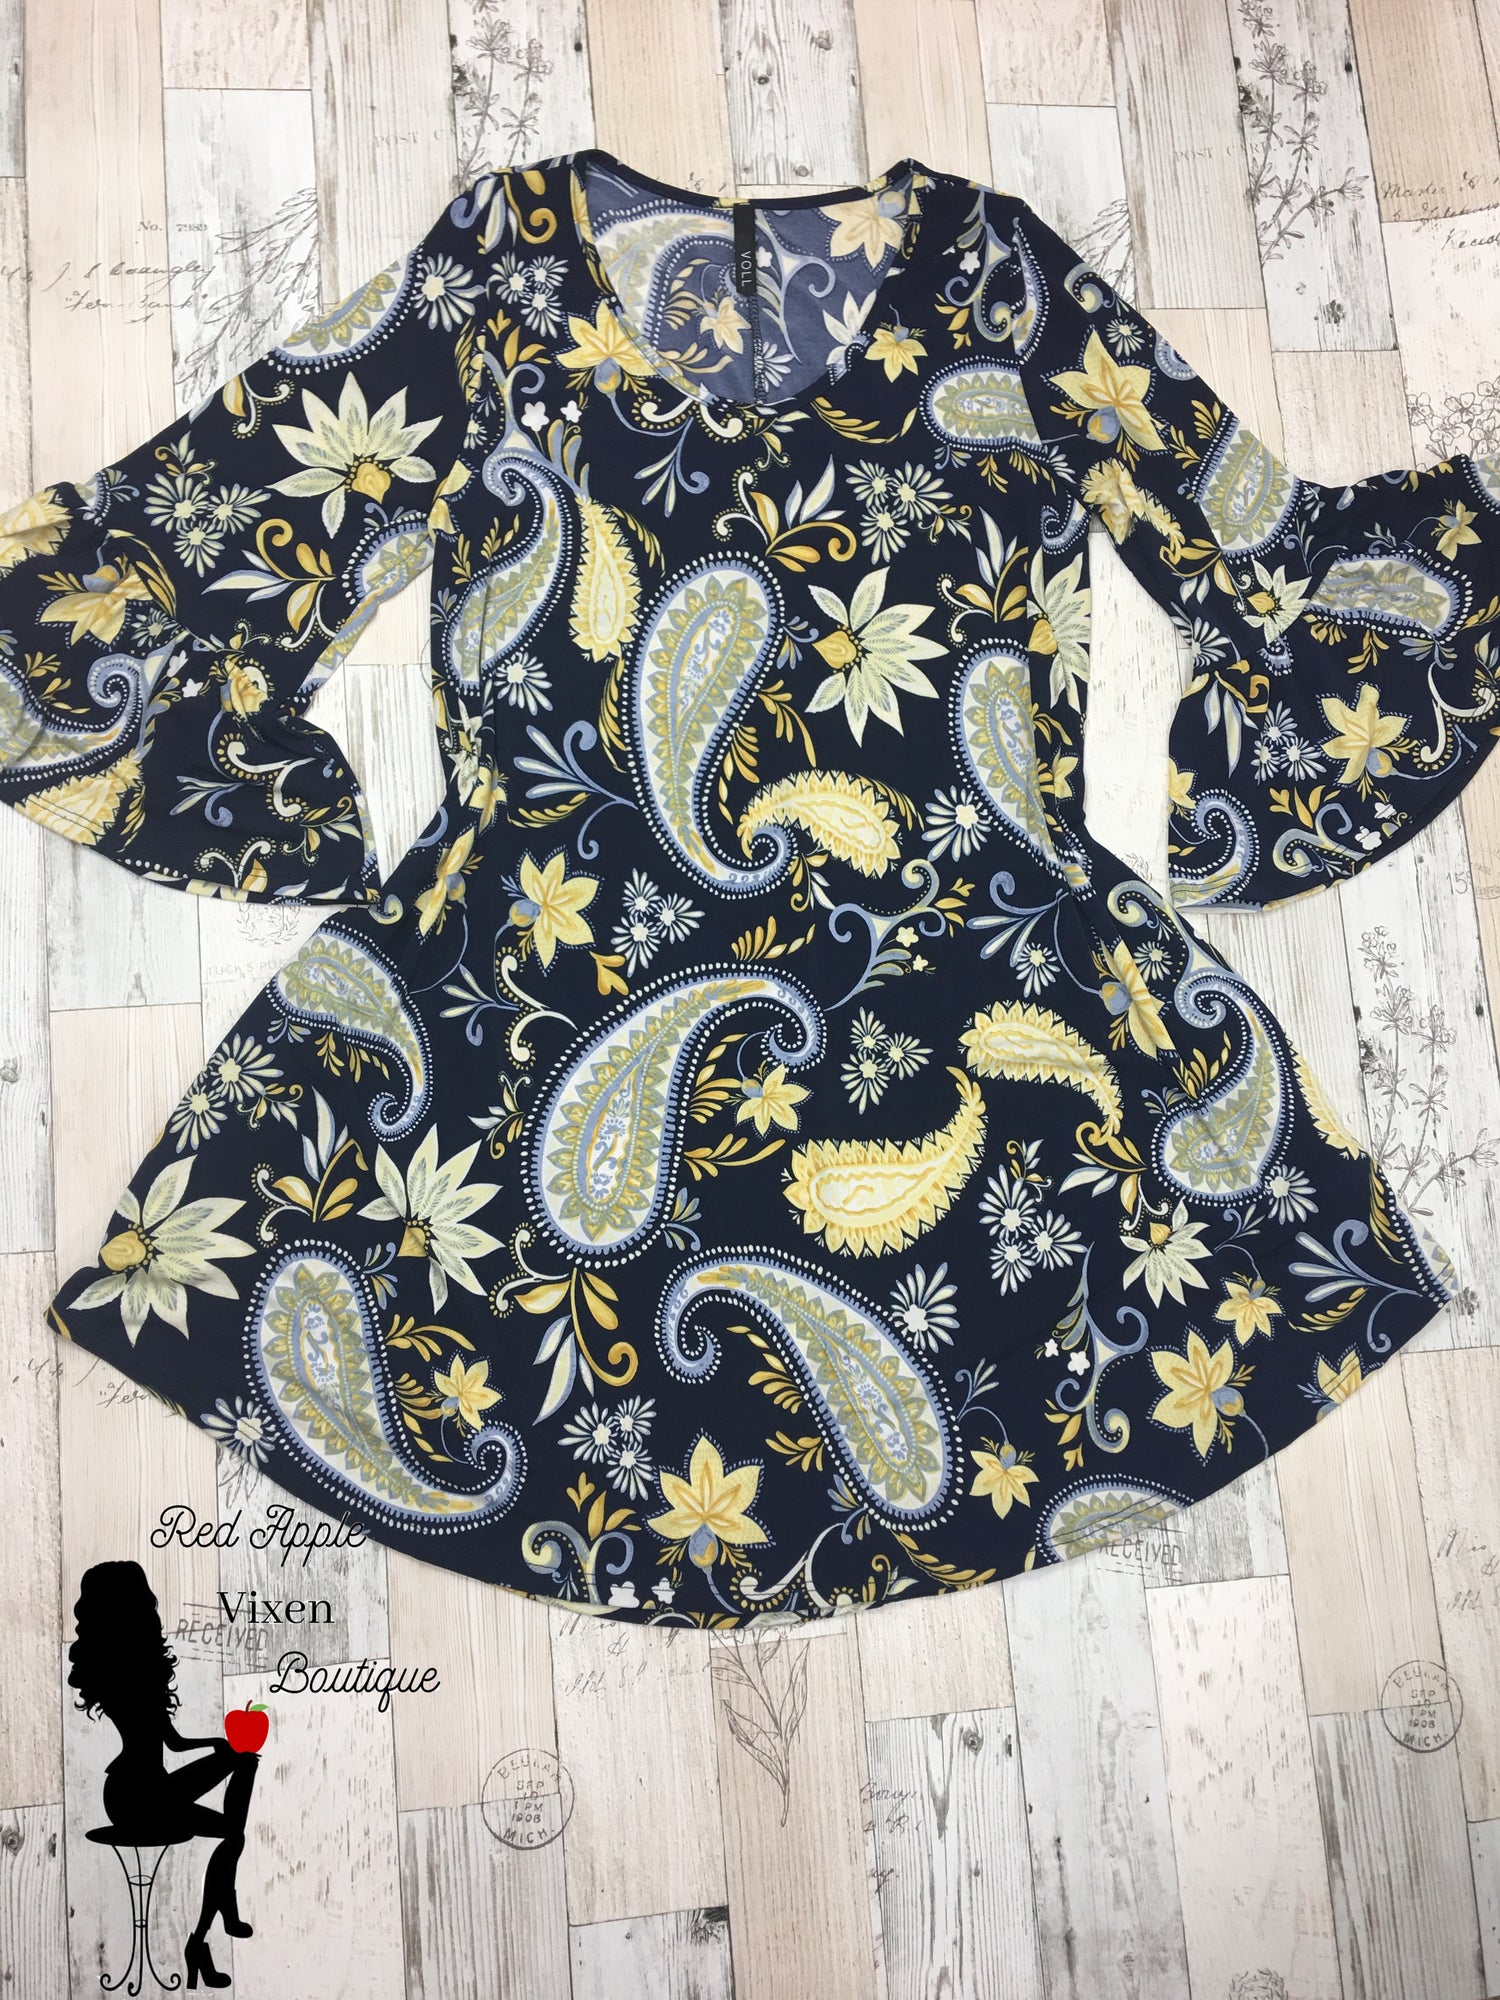 Navy Blue and Yellow Paisley Print Dress - Red Apple Vixen Boutique